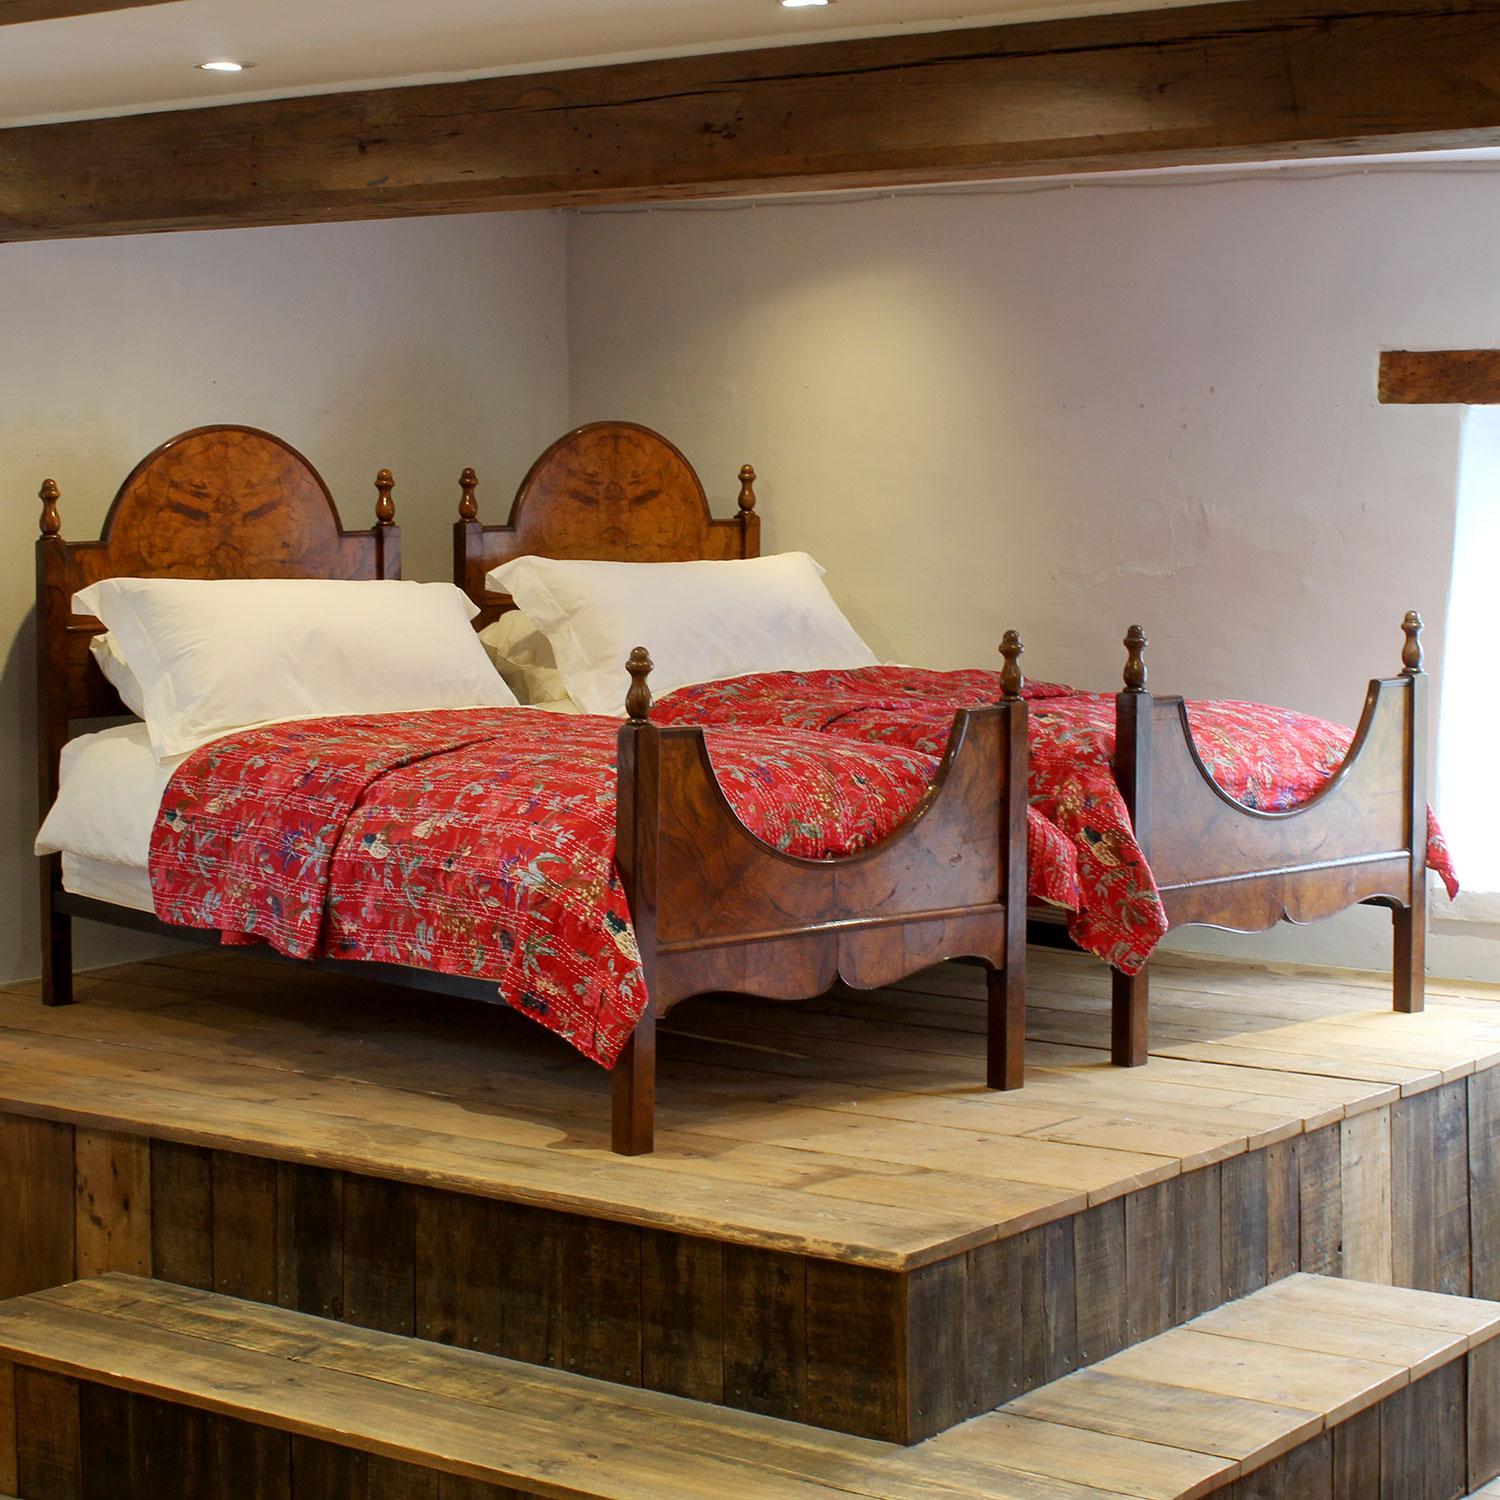 A fine matching pair of antique single beds in burr mahogany.
The beds accept wide single size bases and mattresses, 3ft wide (36 inches)
The price includes two standard firm bed bases to support the mattresses. 
The mattresses and bedding are extra